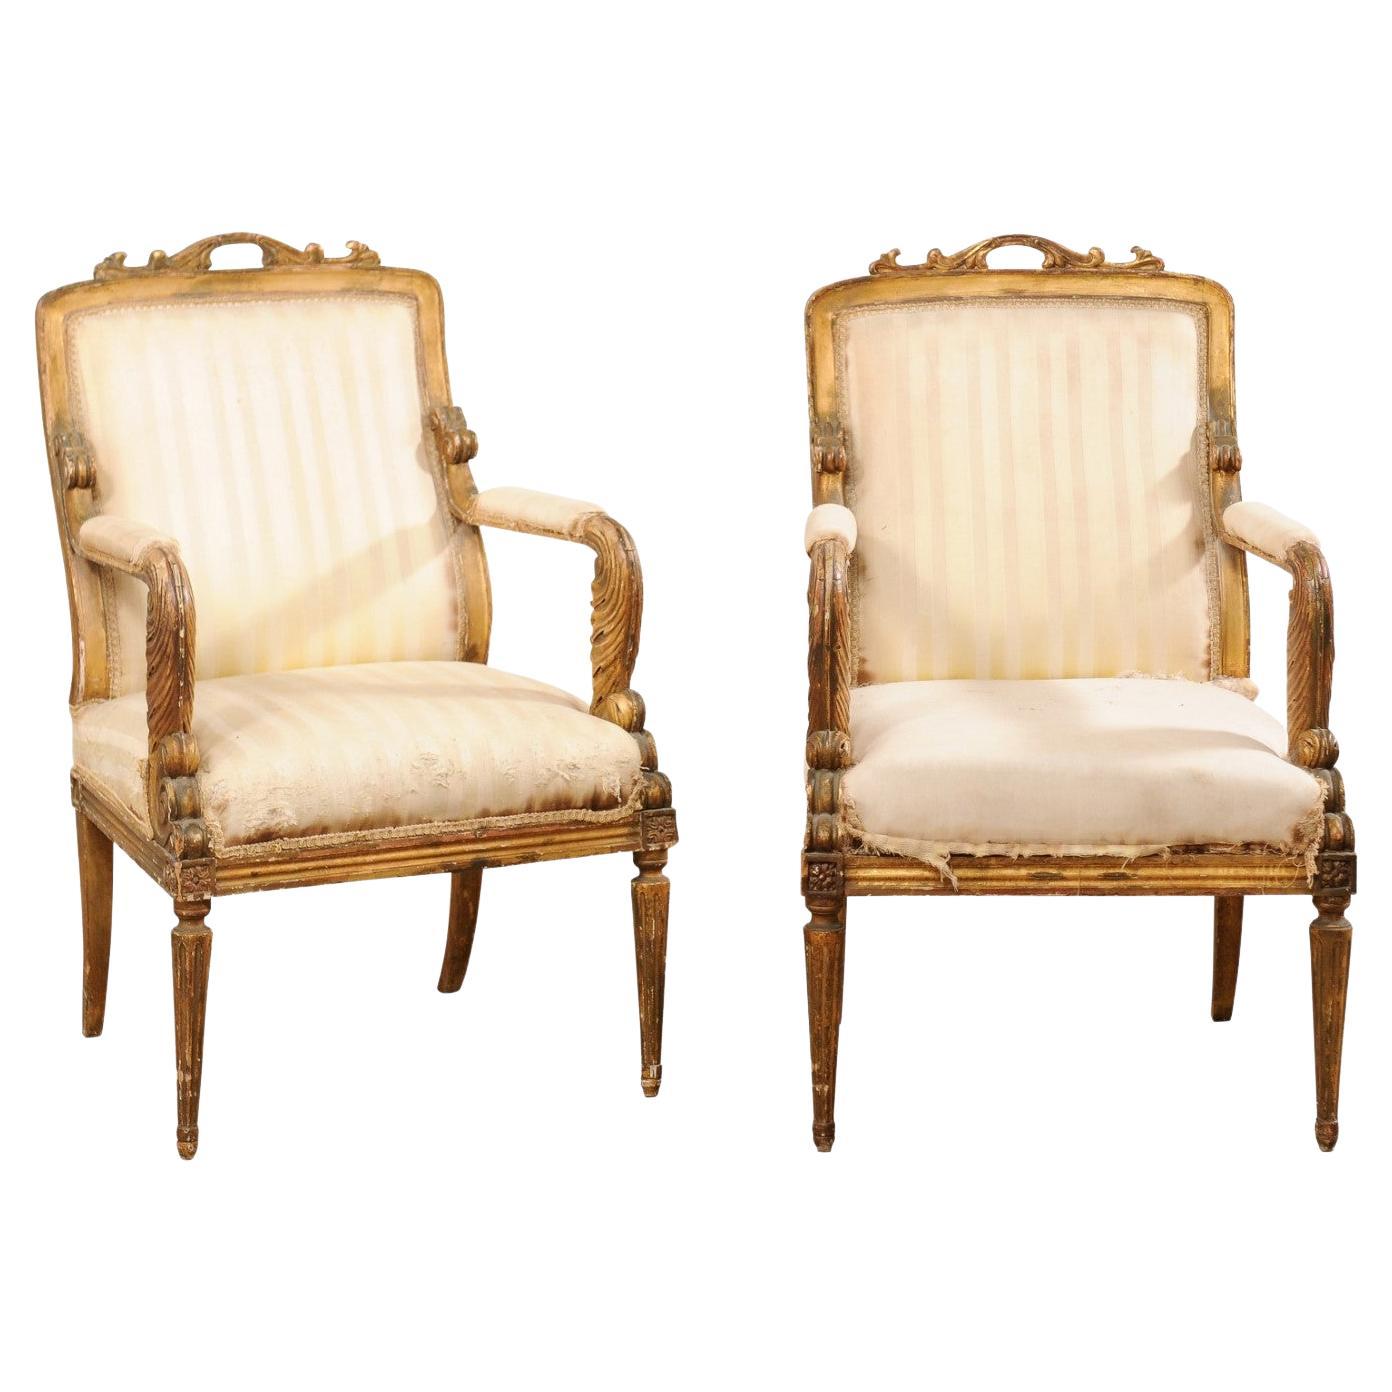 French Pair of Louis XVI Style Fauteuils, Early 19th Century 